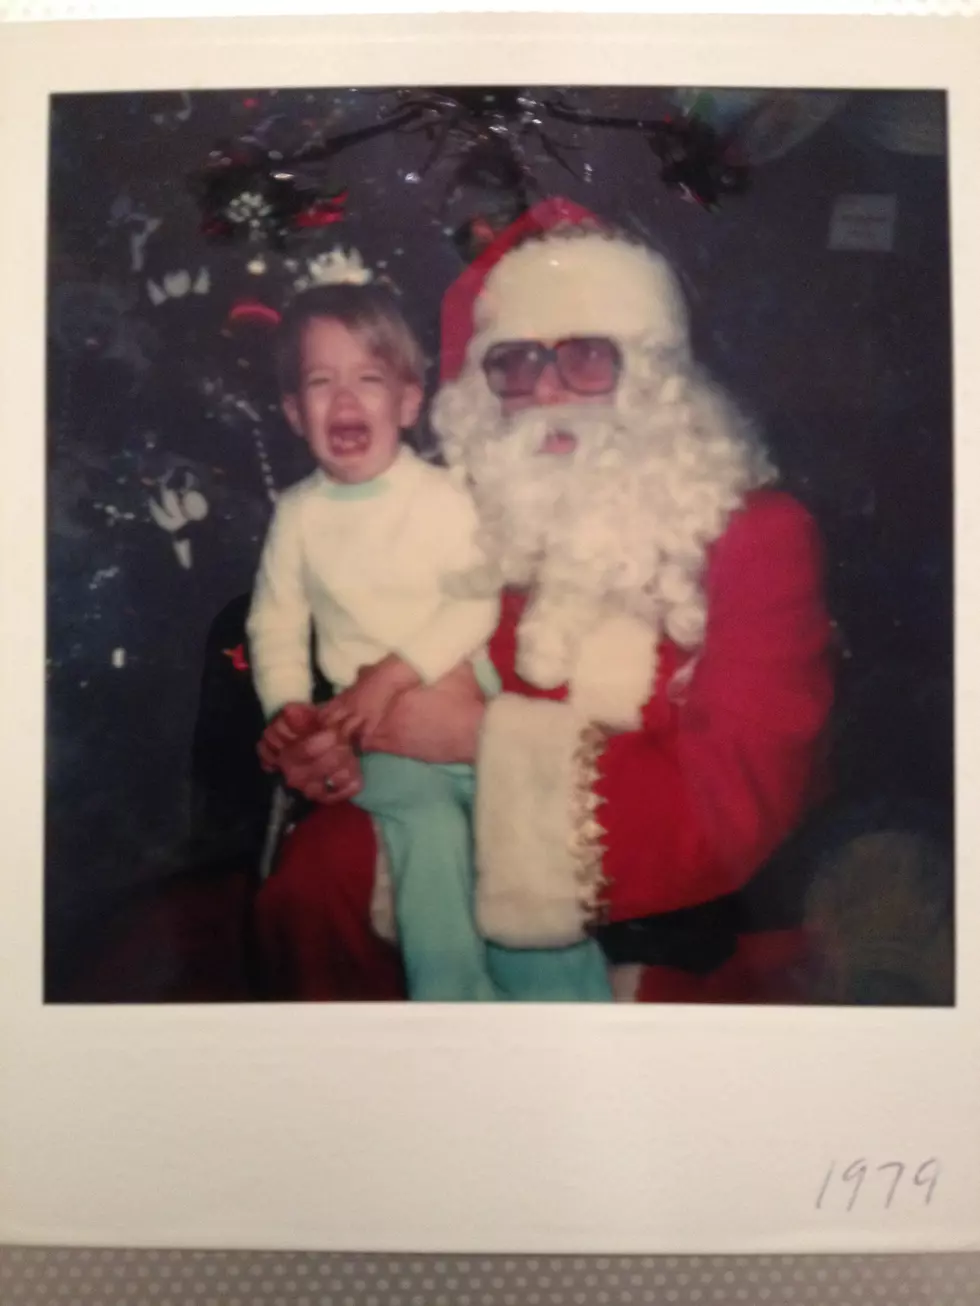 Scared Of Santa 2013 — Round 1, Group 5